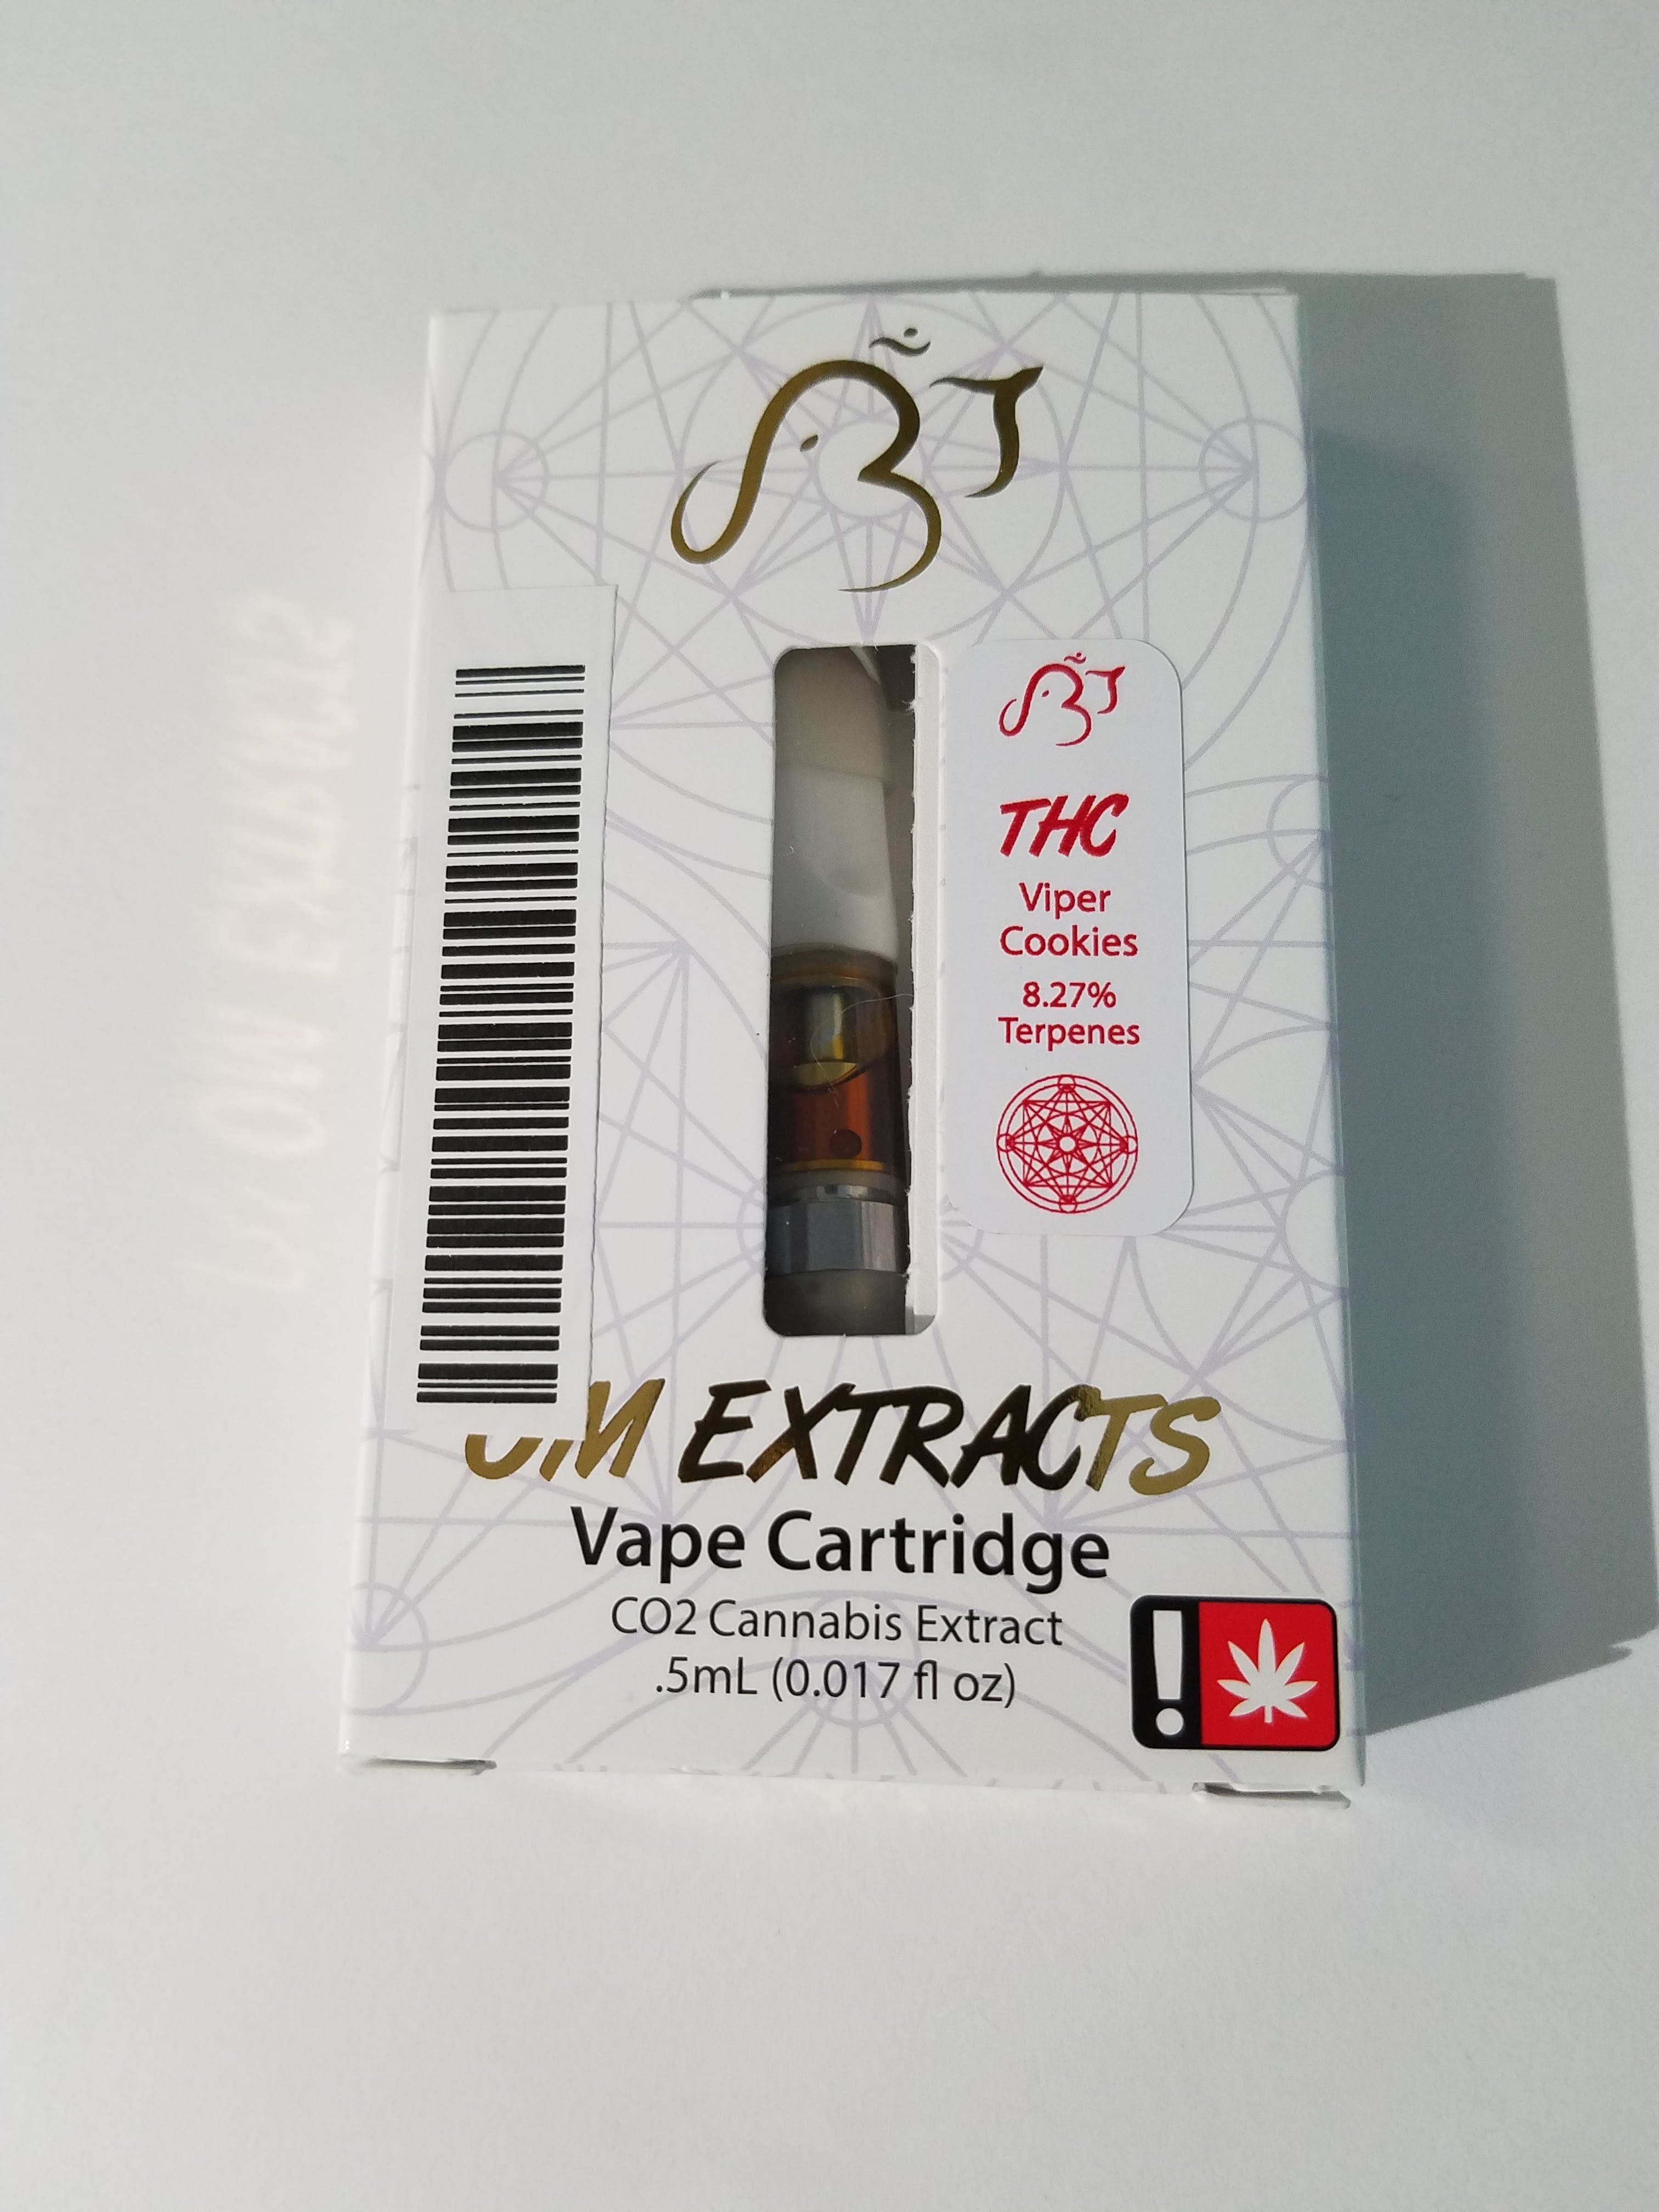 concentrate-5g-viper-cookies-cartridge-om-extracts